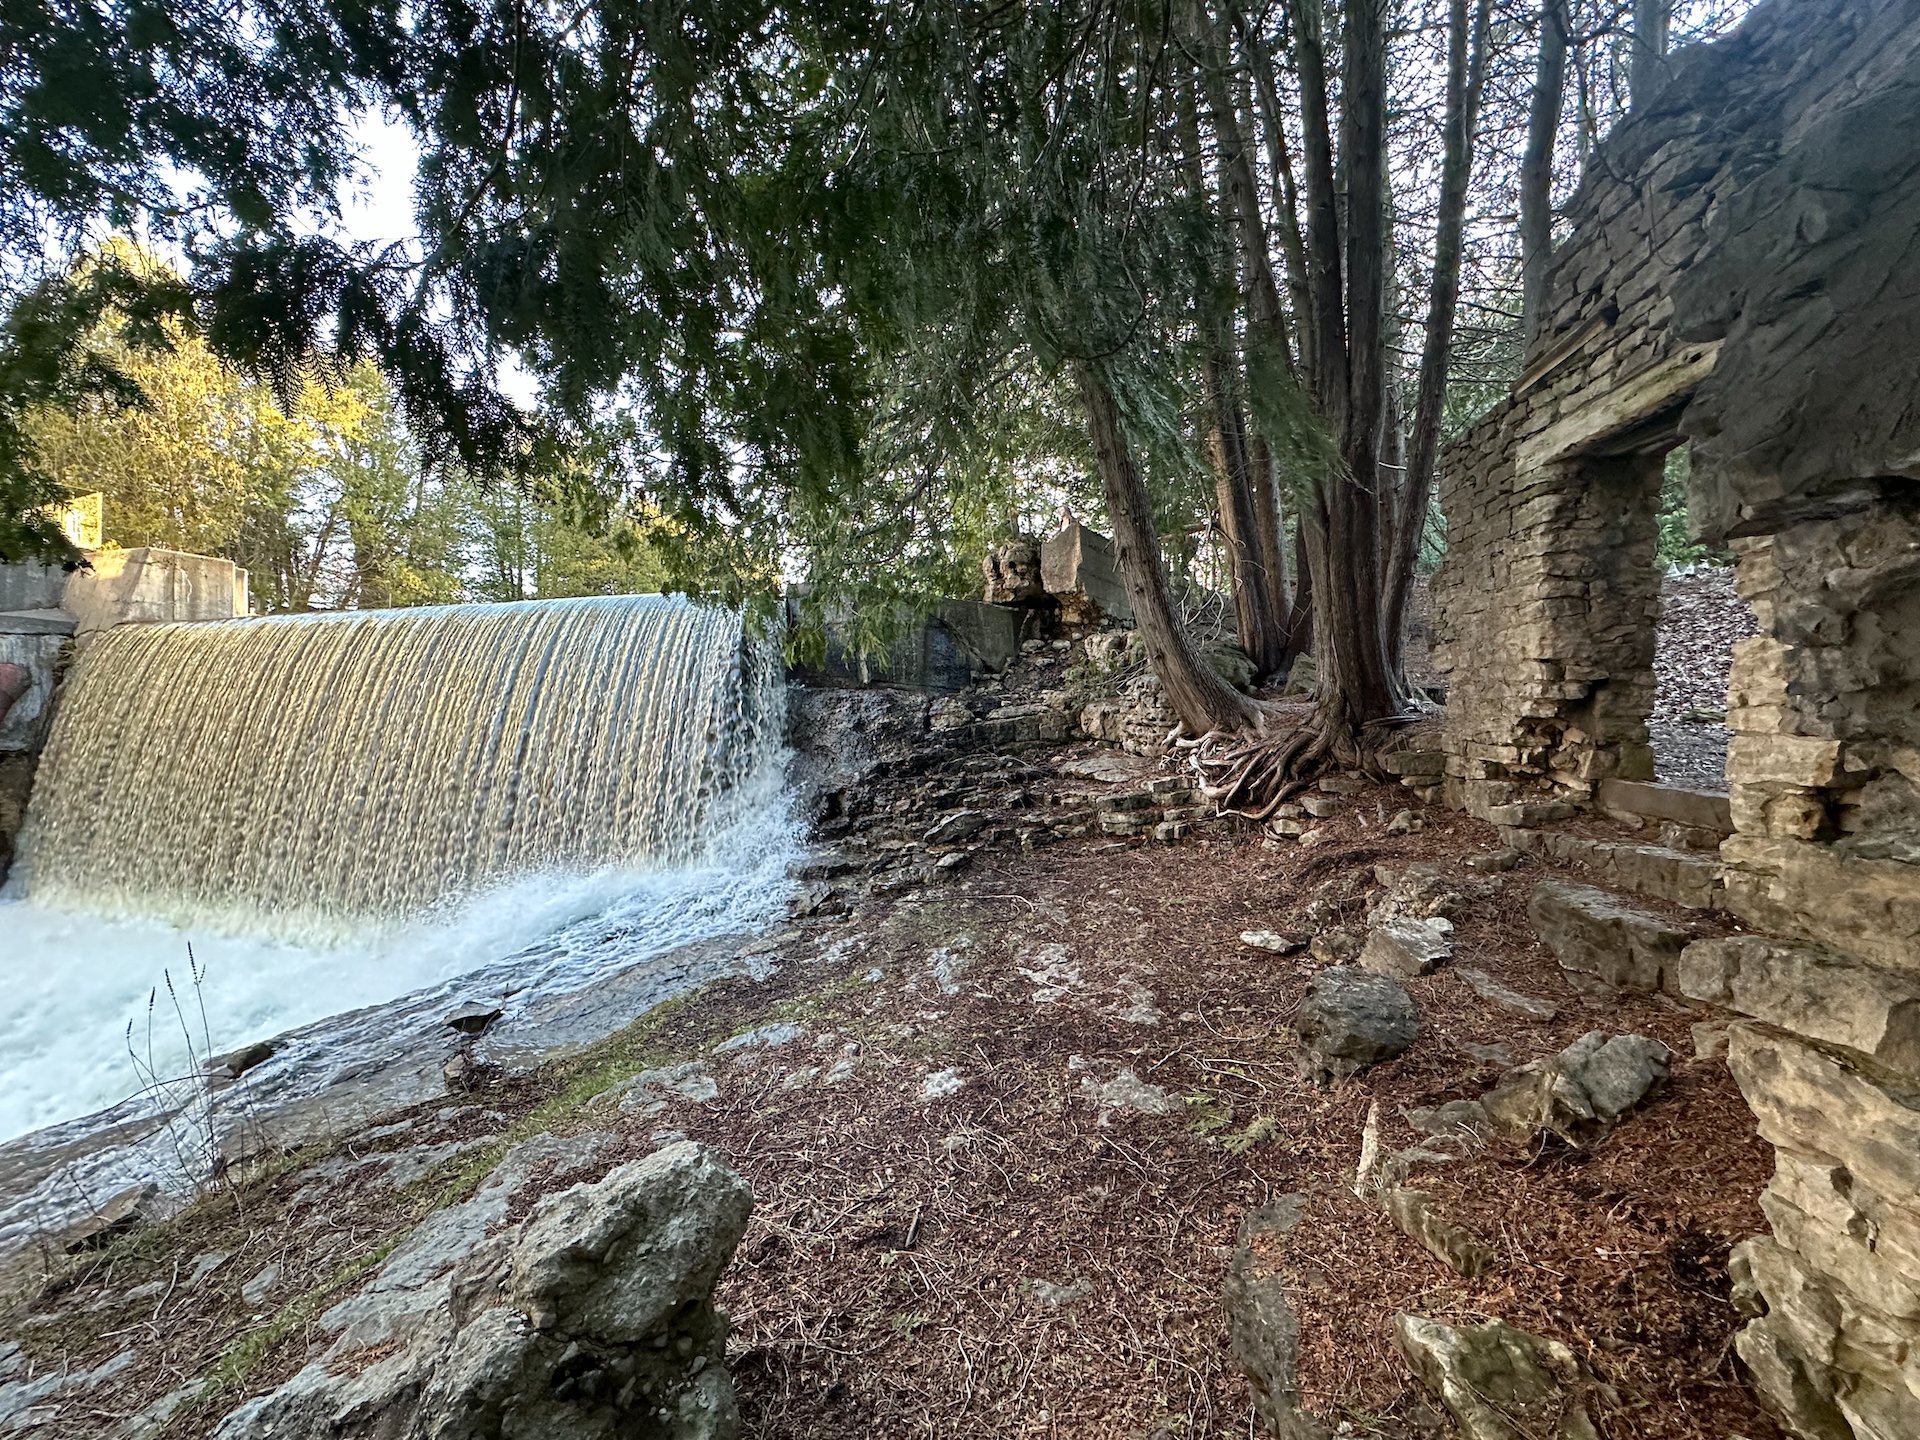  The waterfall and a piece of the old mill infrastructure that’s still standing. Mostly used for photo opps.  